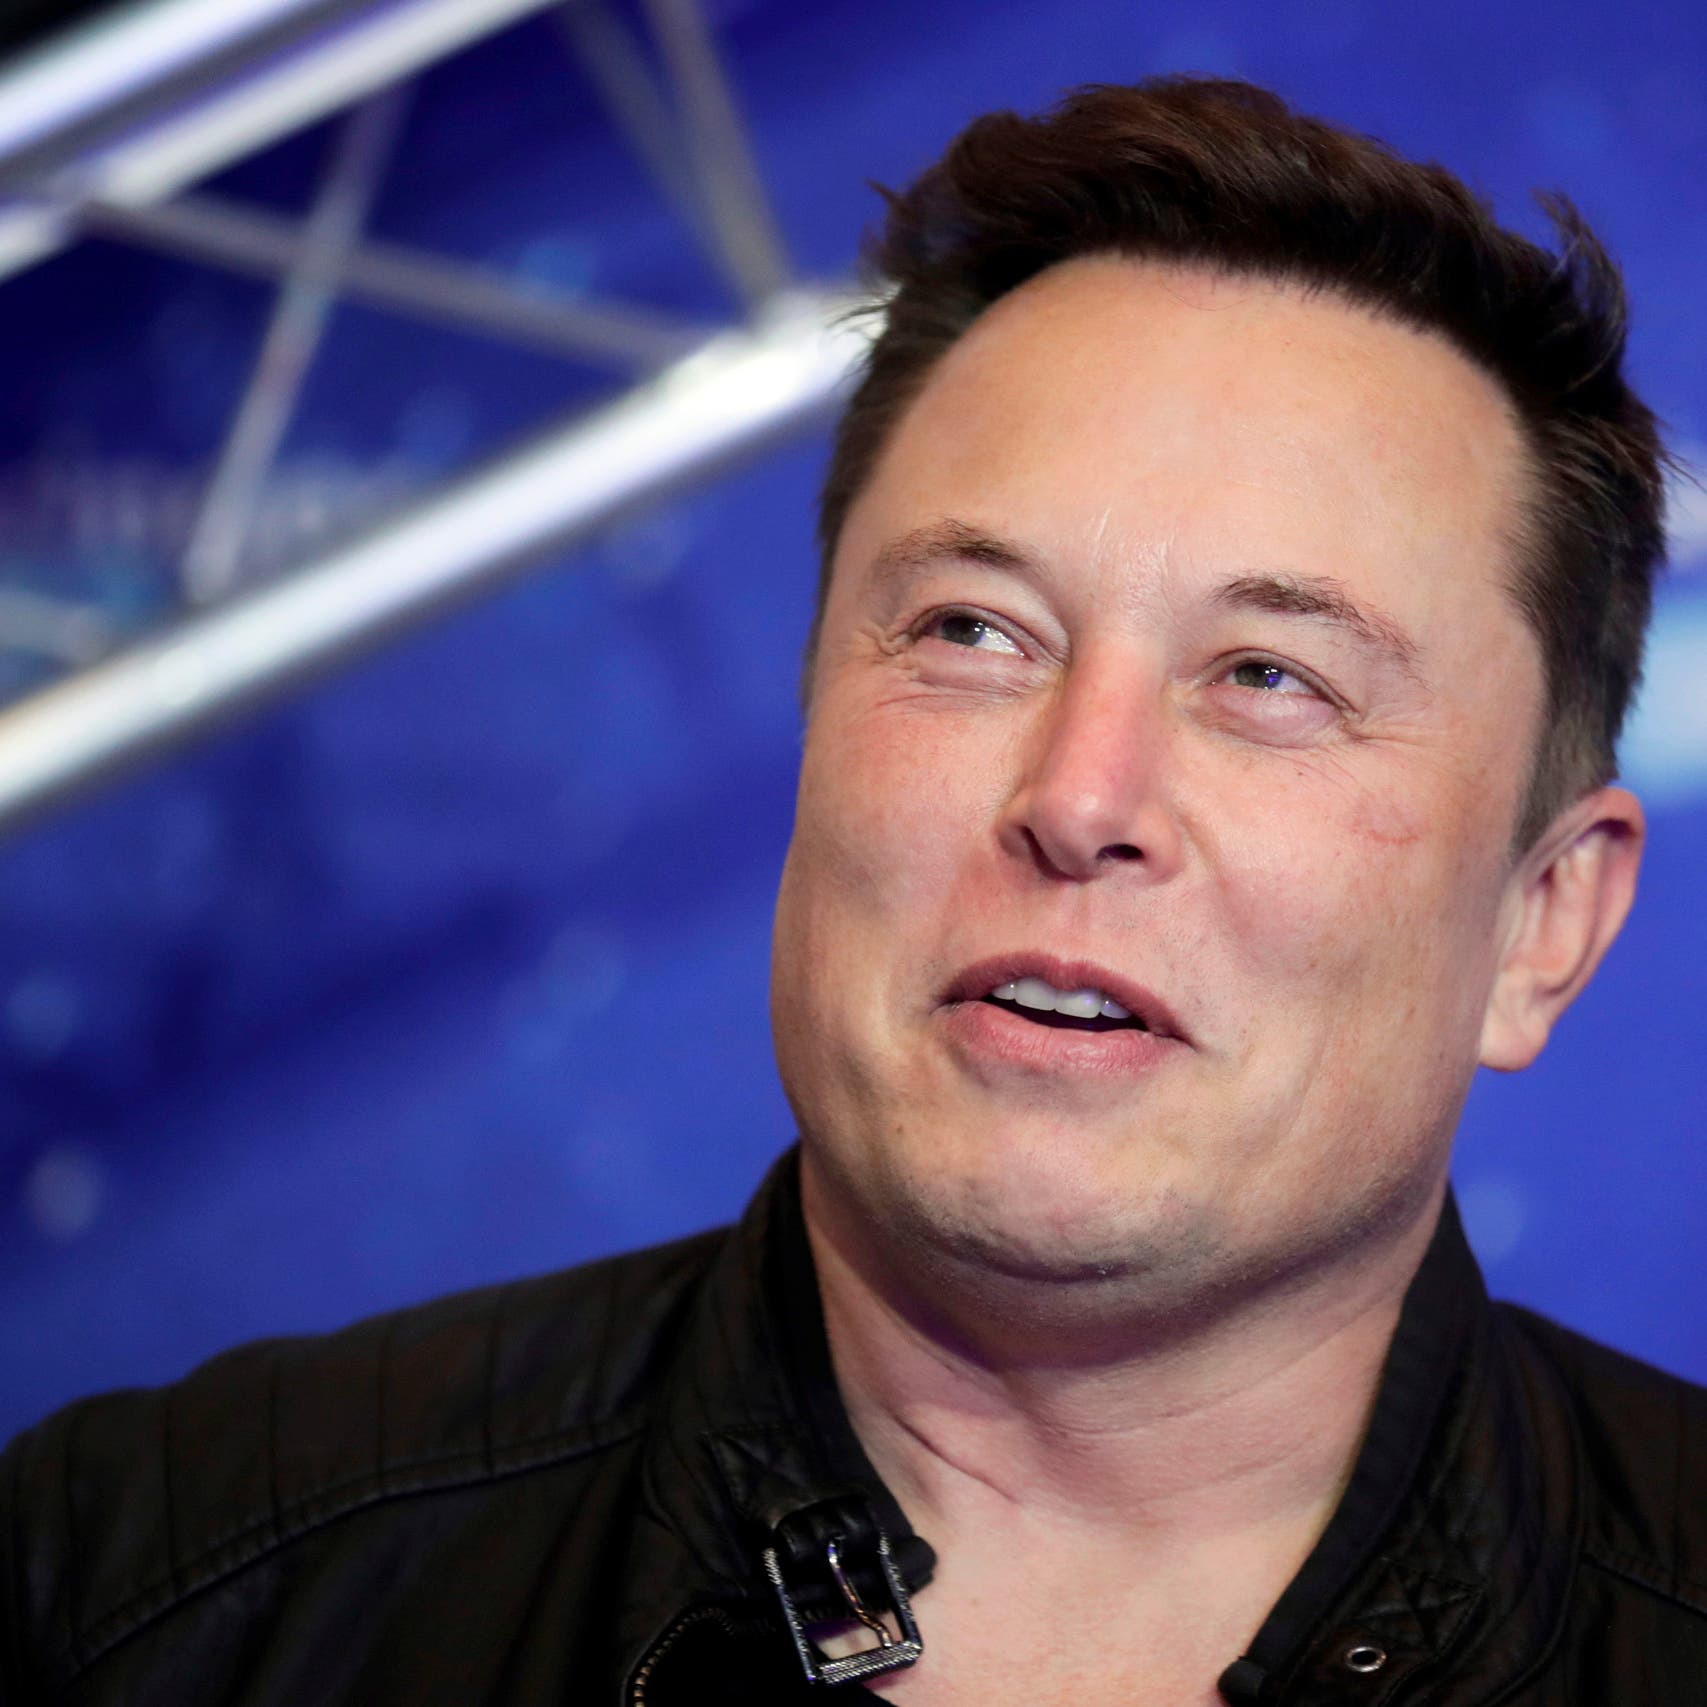 Elon Musk says expects Neuralink to begin human trials in six months